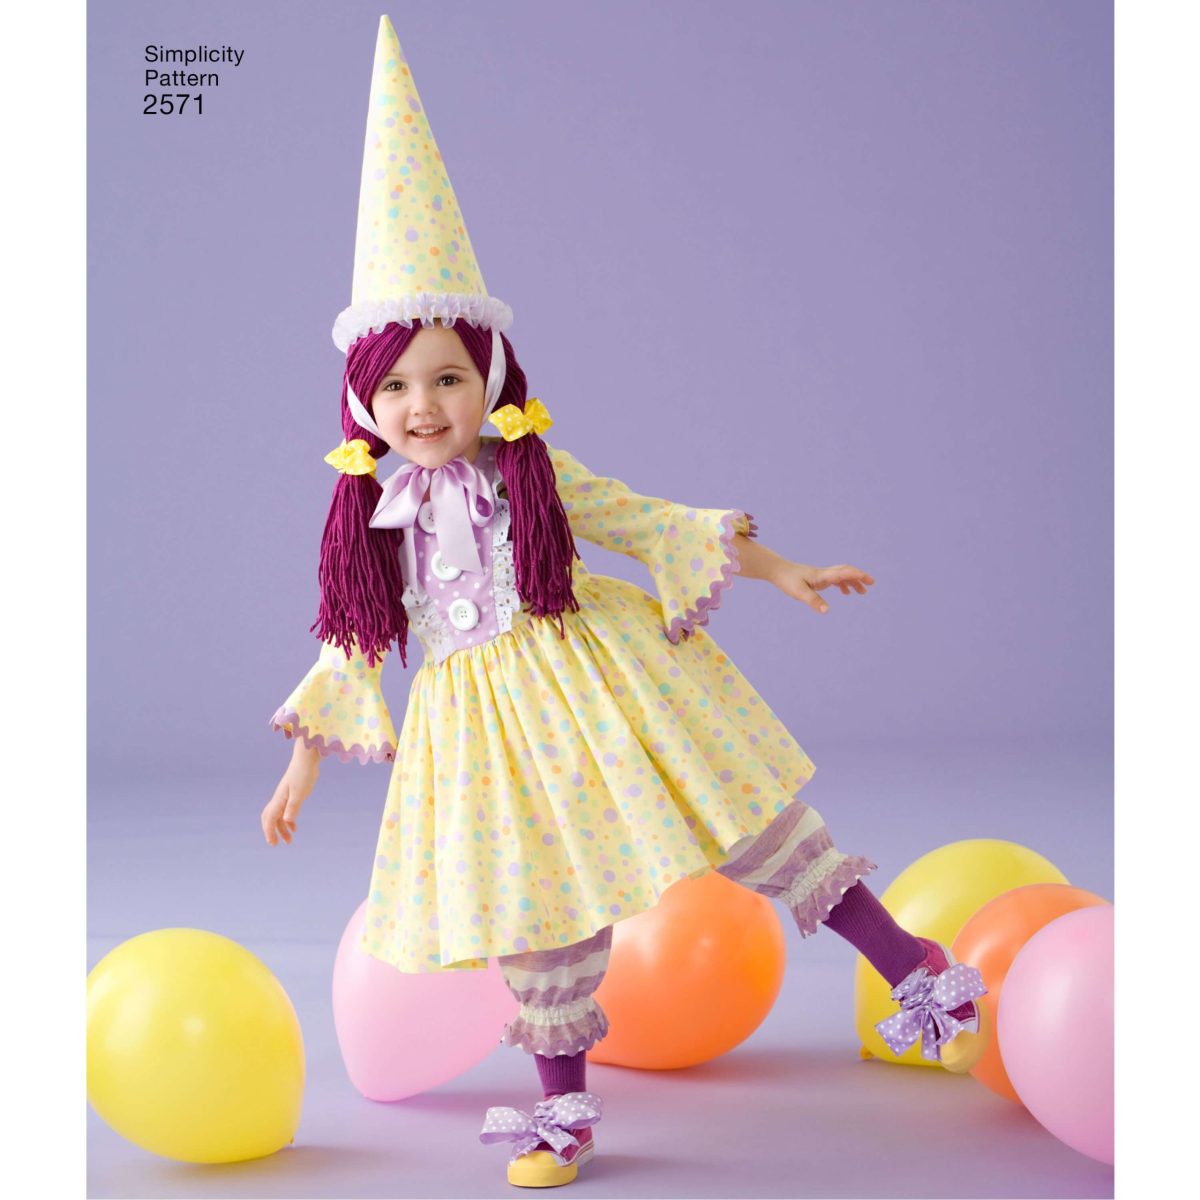 Simplicity Sewing Pattern 2571 Toddler Costumes